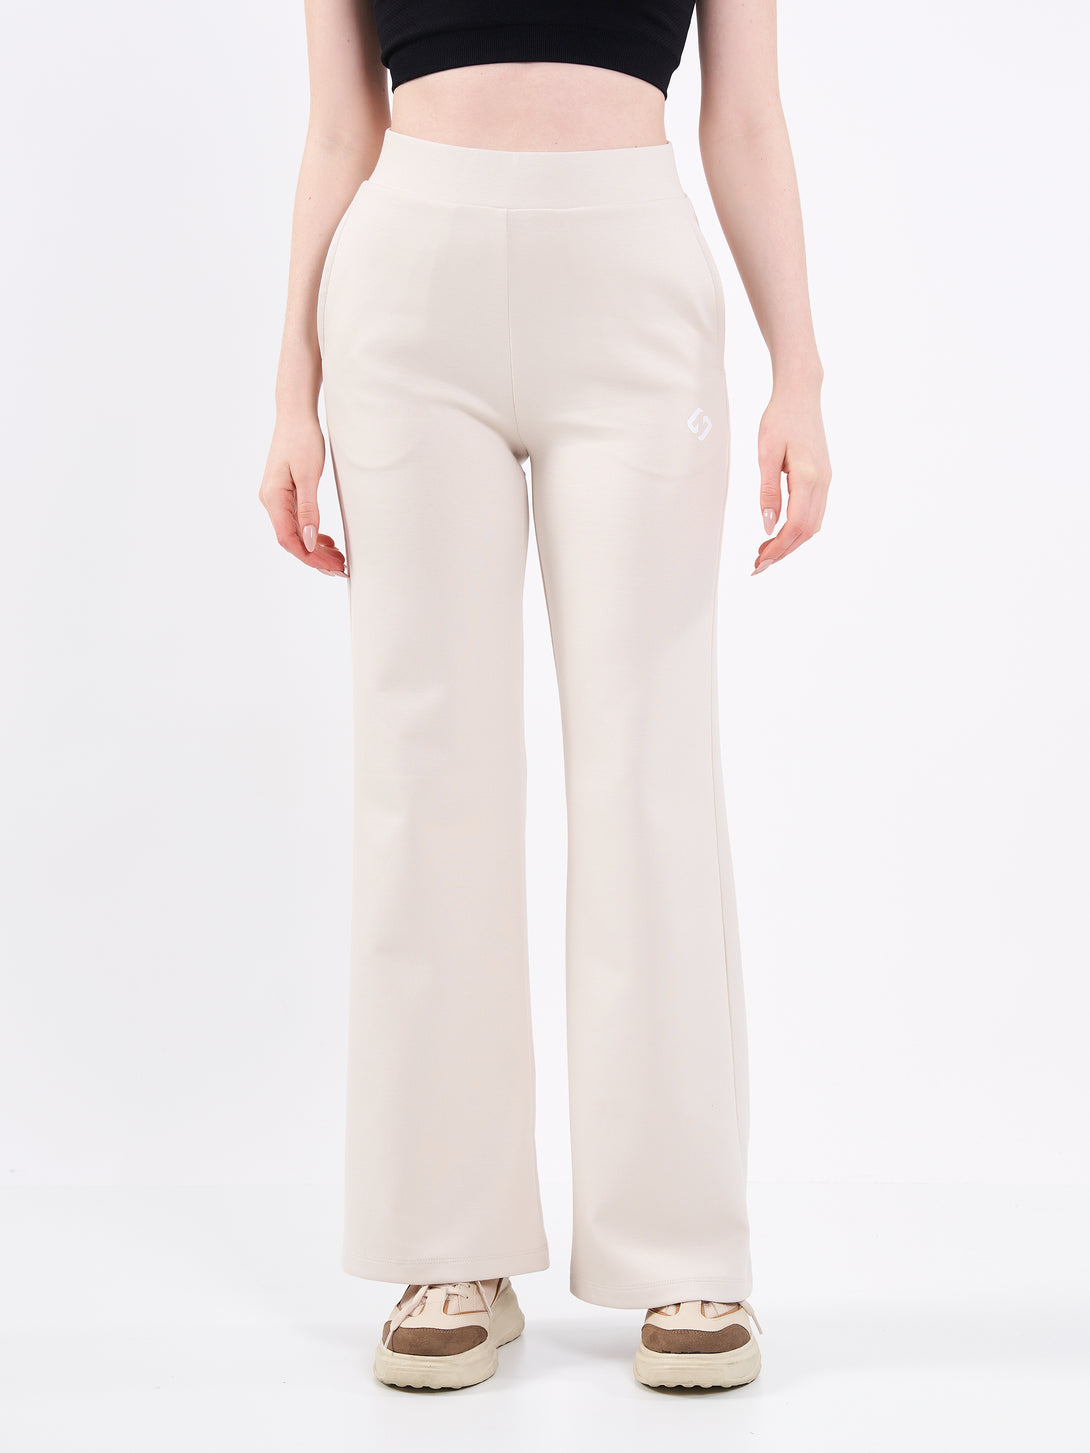 A Woman Wearing White Sand Color Durable Flare-Leg Comfort Joggers for All-Day Wear